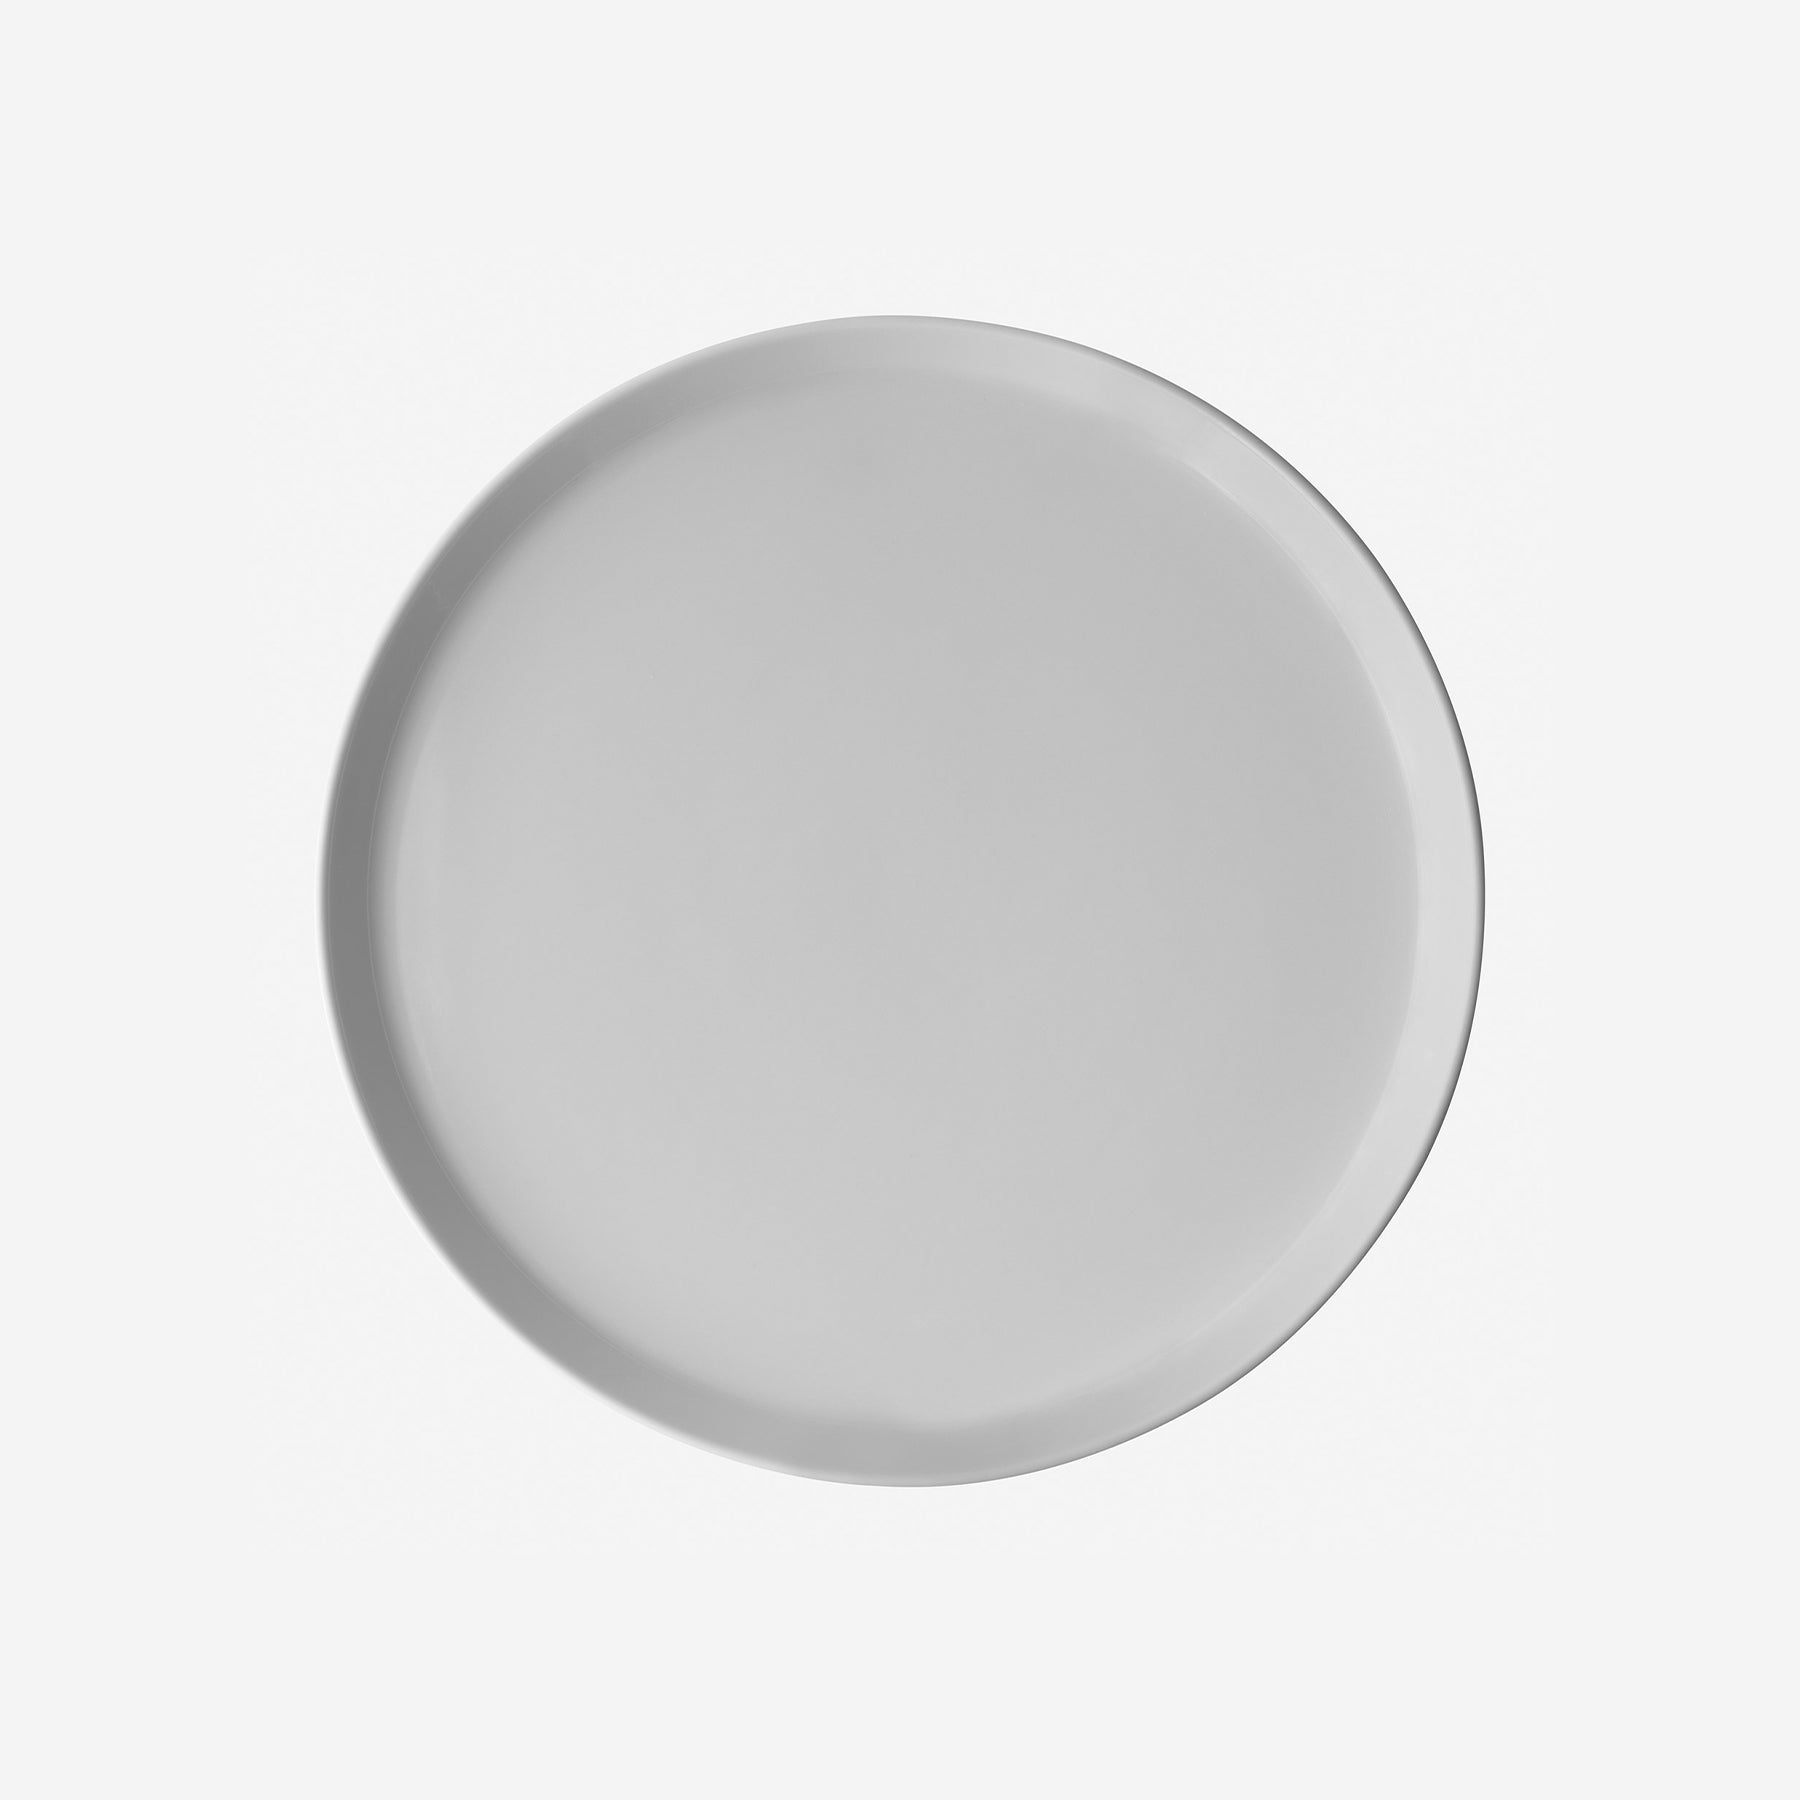 Vipp 212 White Lunch Plate 2pcs